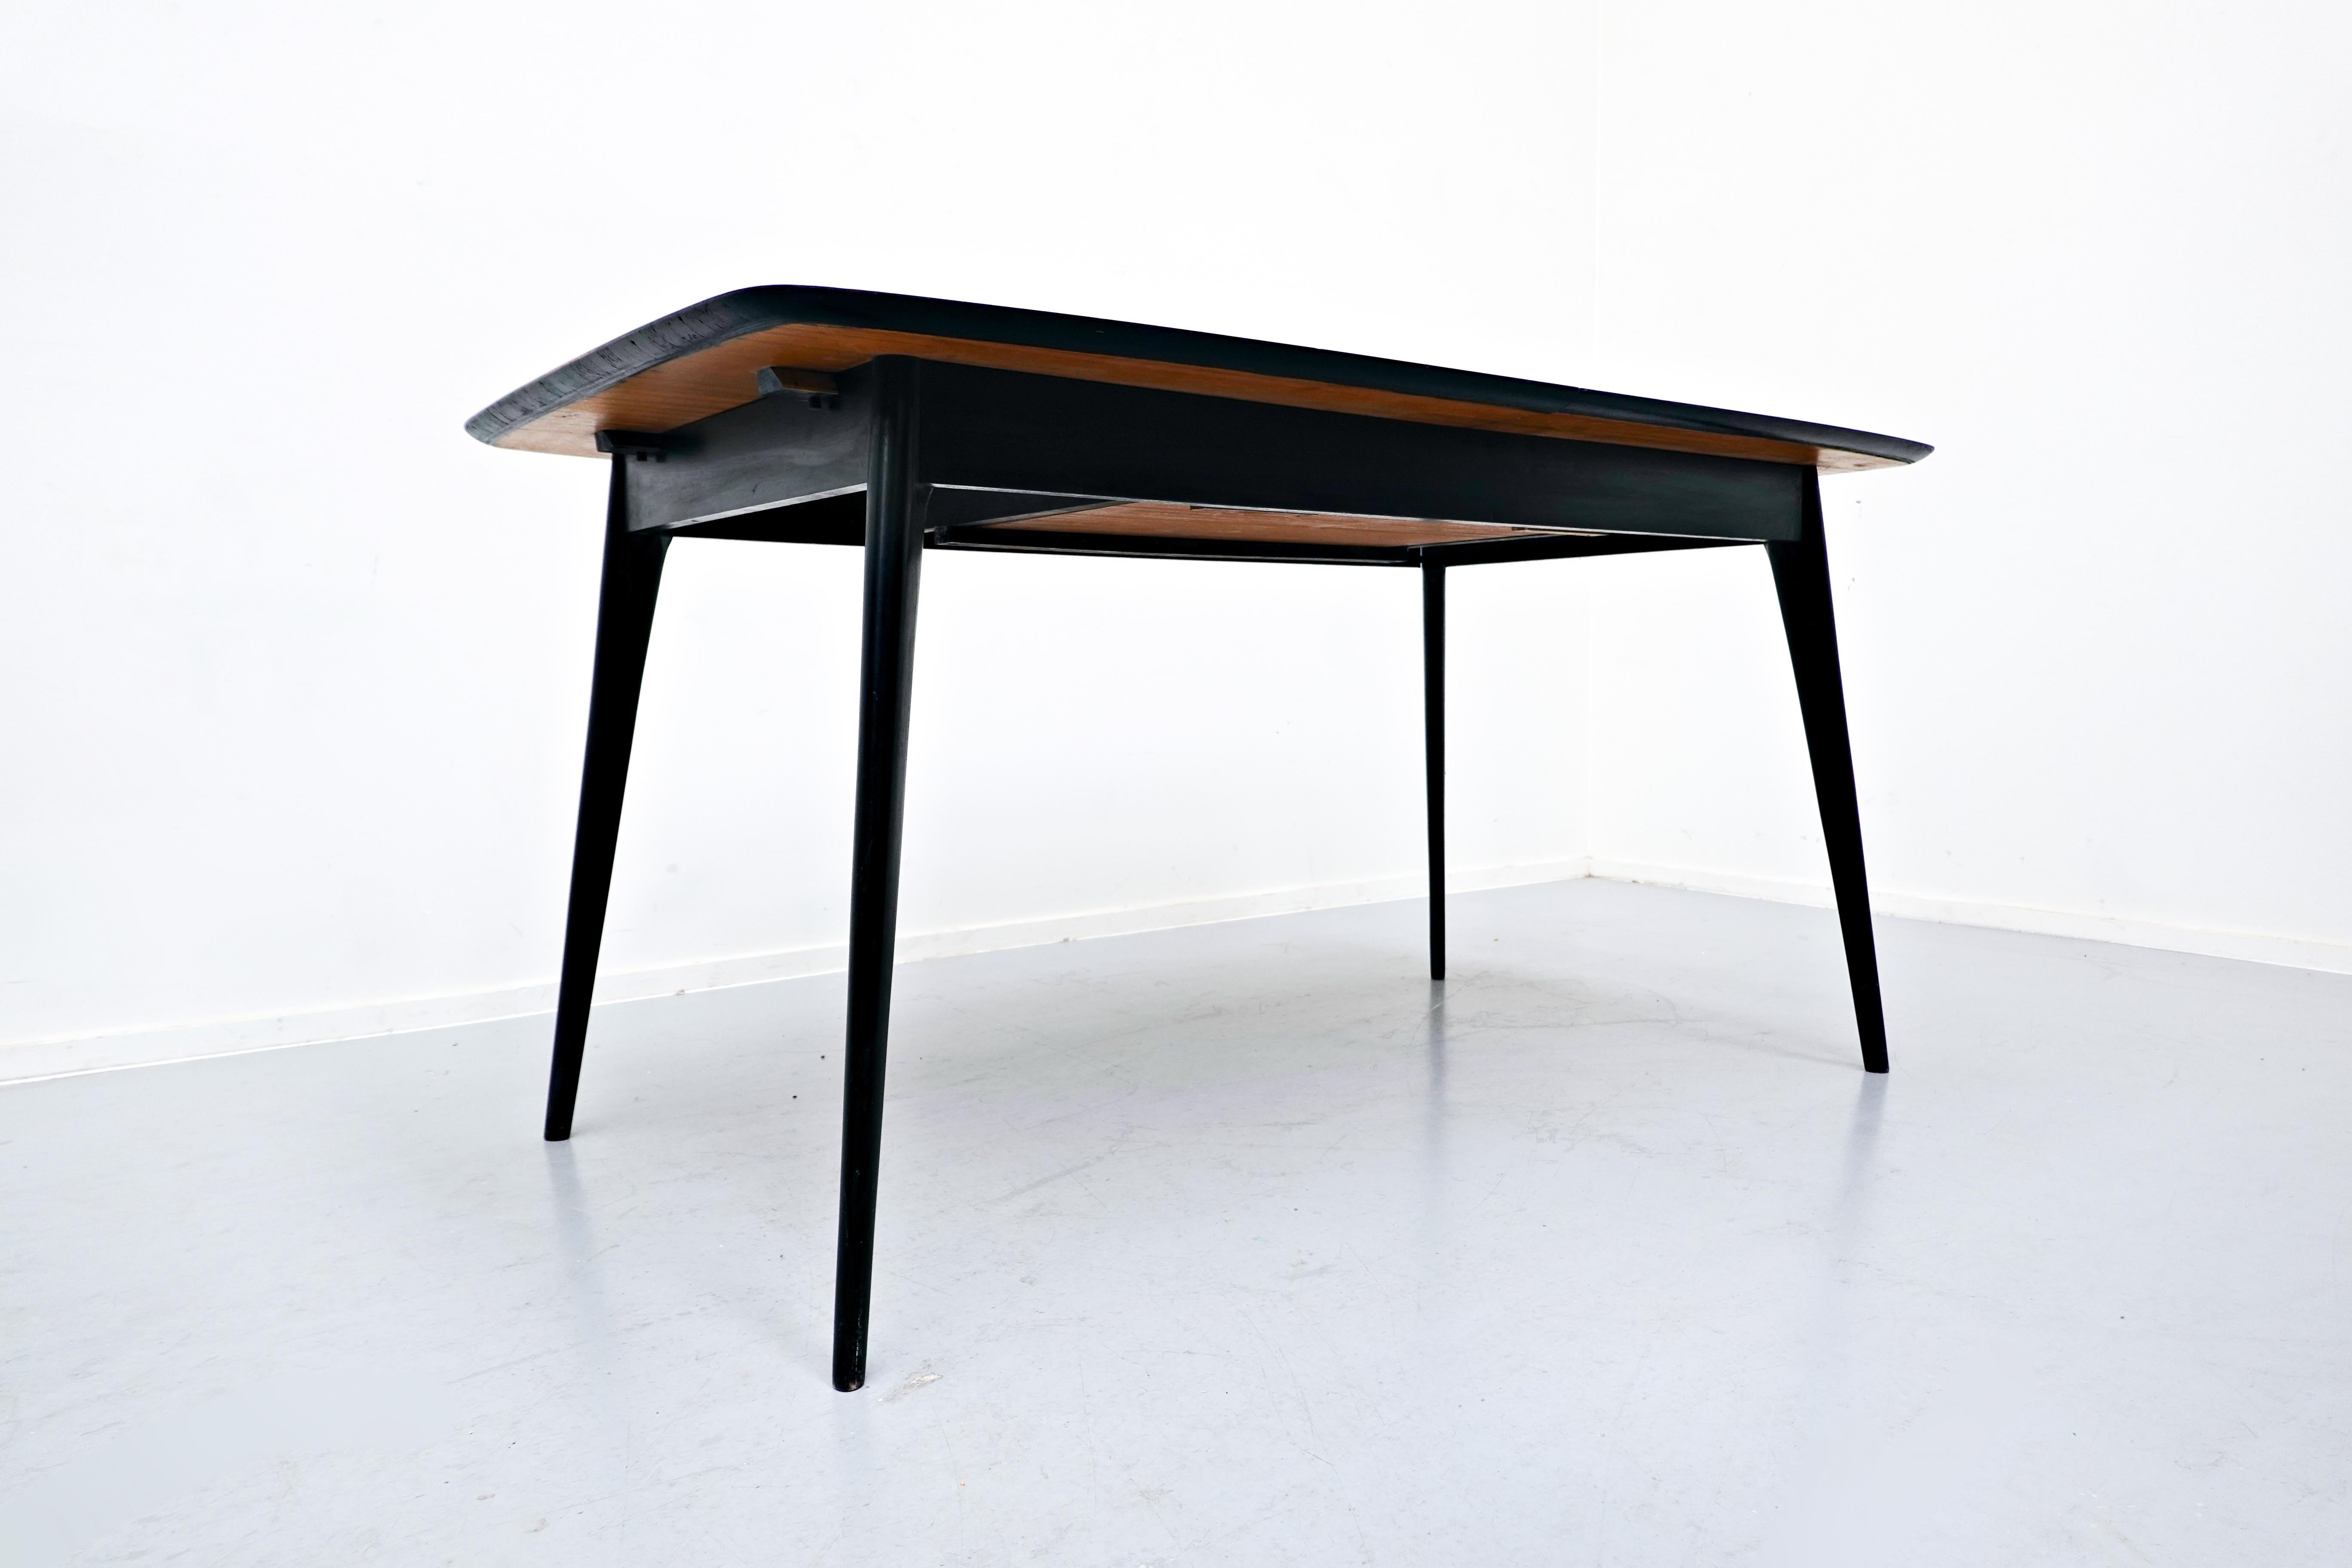 Alfred Hendrickx extendable dining table, 1970s, Belgium, Mid-Century Modern, European
Mid-Century Modern
Alfred Hendrickx, Belgian designer, was born in 1931.
He uses fine woods like rosewood and teak as well as less luxurious materials like